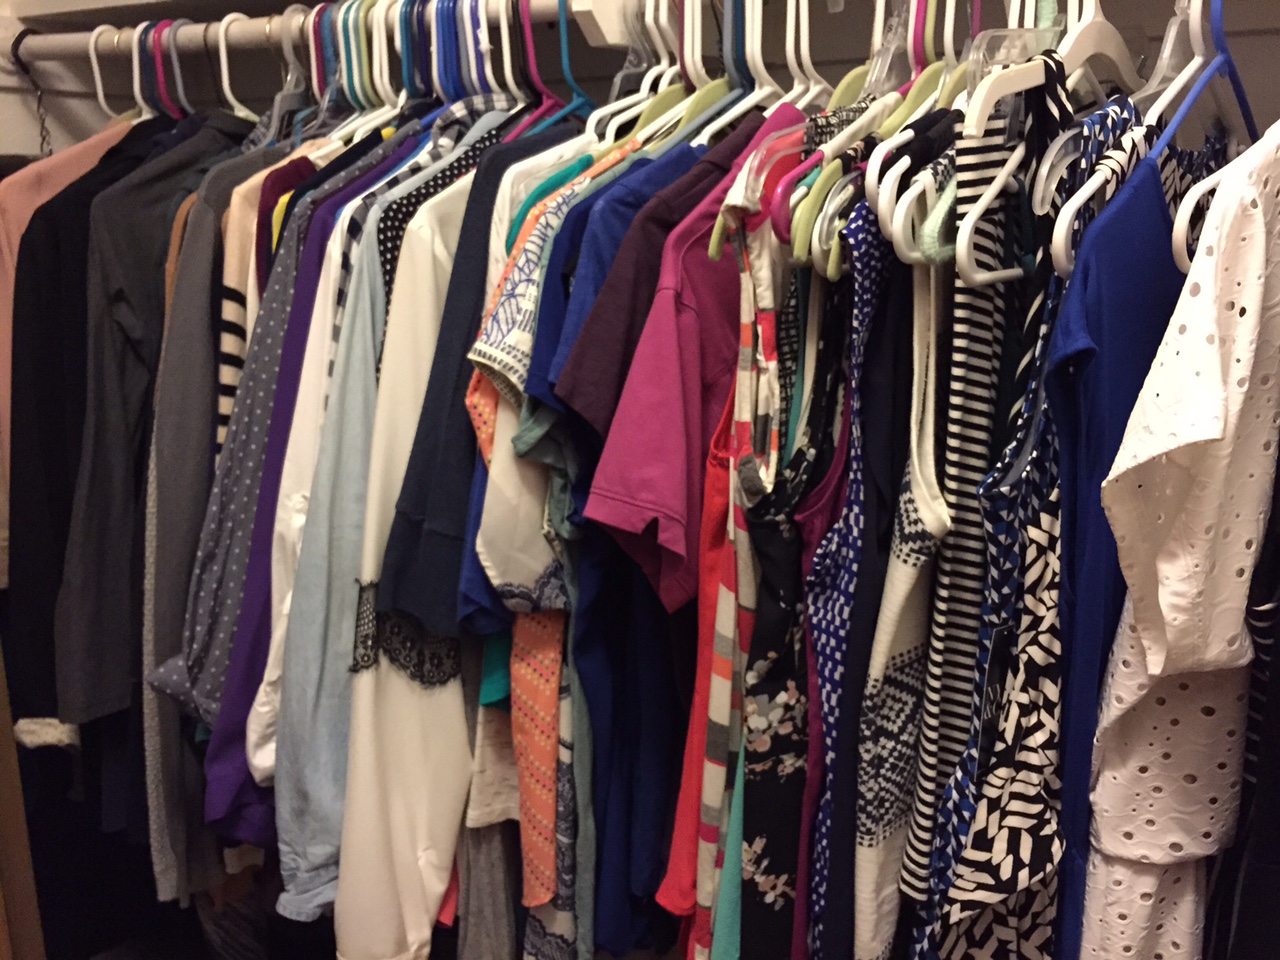 My closet post-decluttering frenzy. Yes, fewer items, but all items I actually love!